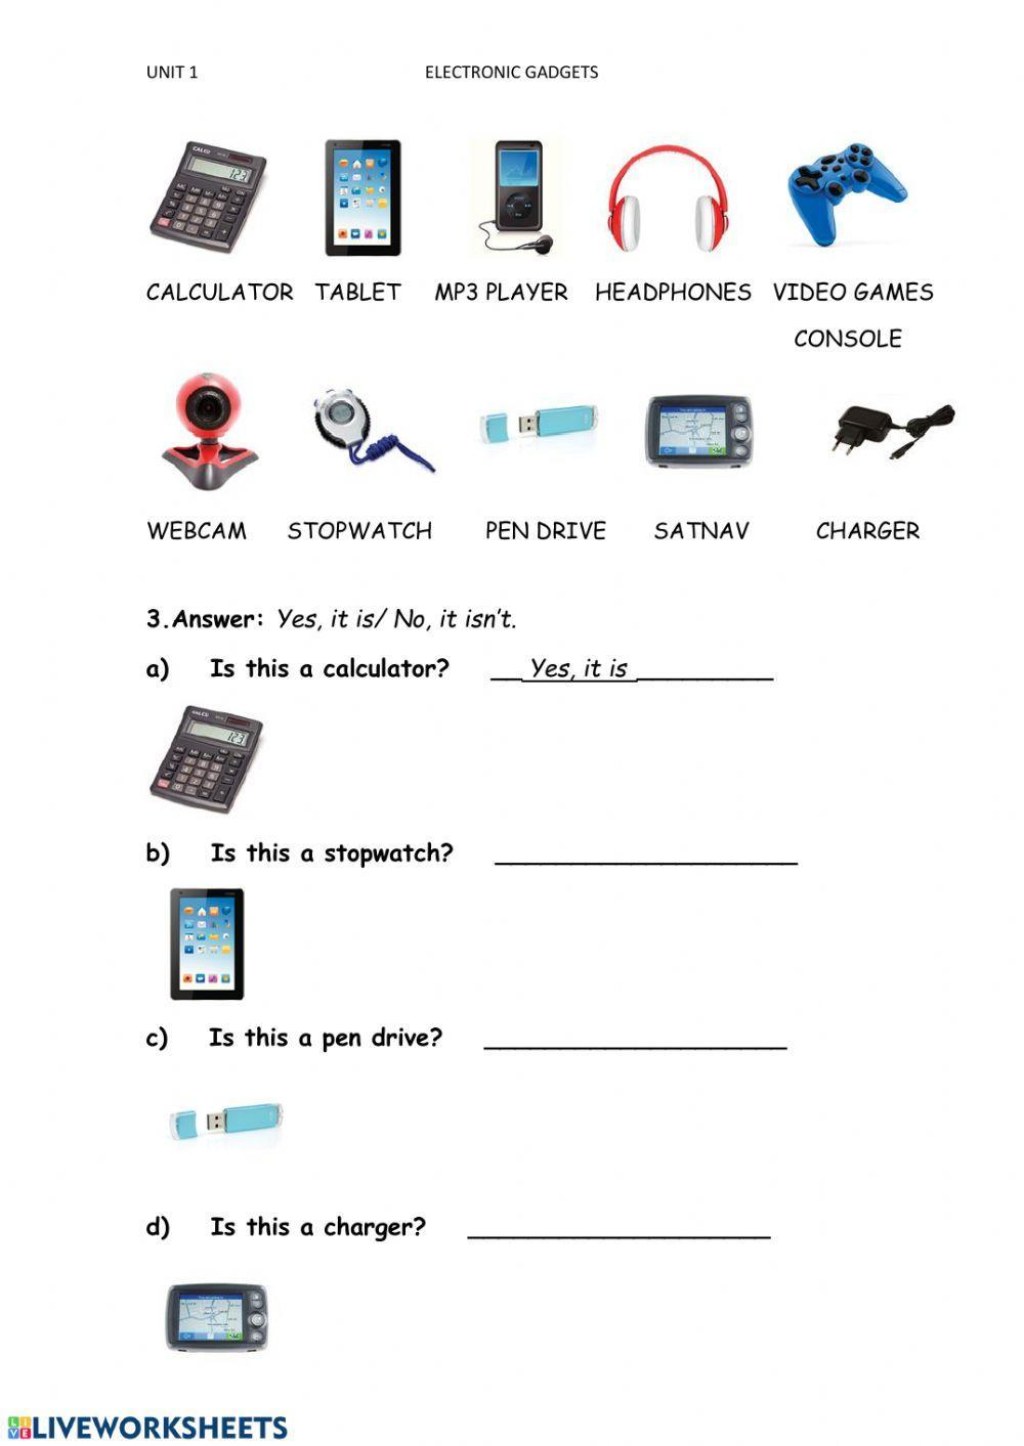 Picture of: Electronic gadgets worksheet  Live Worksheets